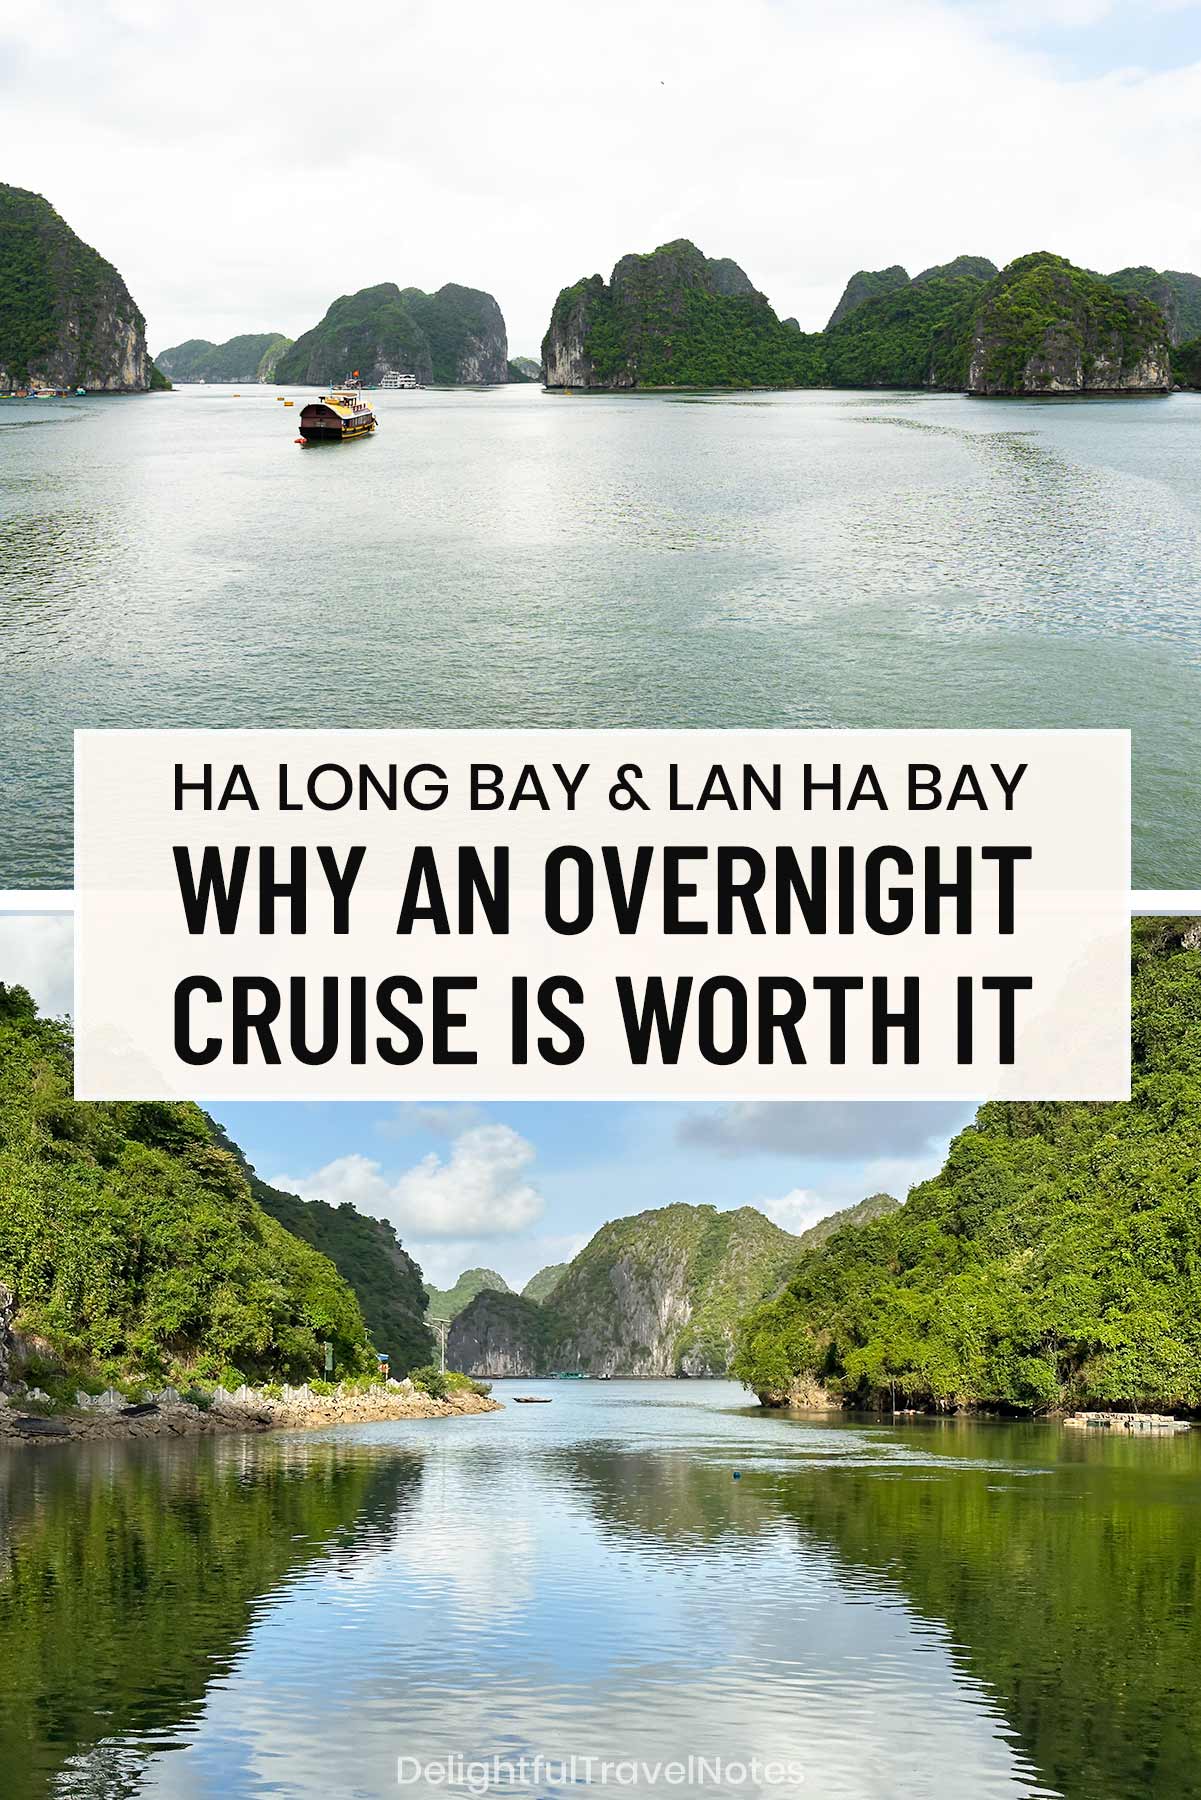 a collage of scenery taken from cruises in Lan Ha Bay and Ha Long Bay areas.